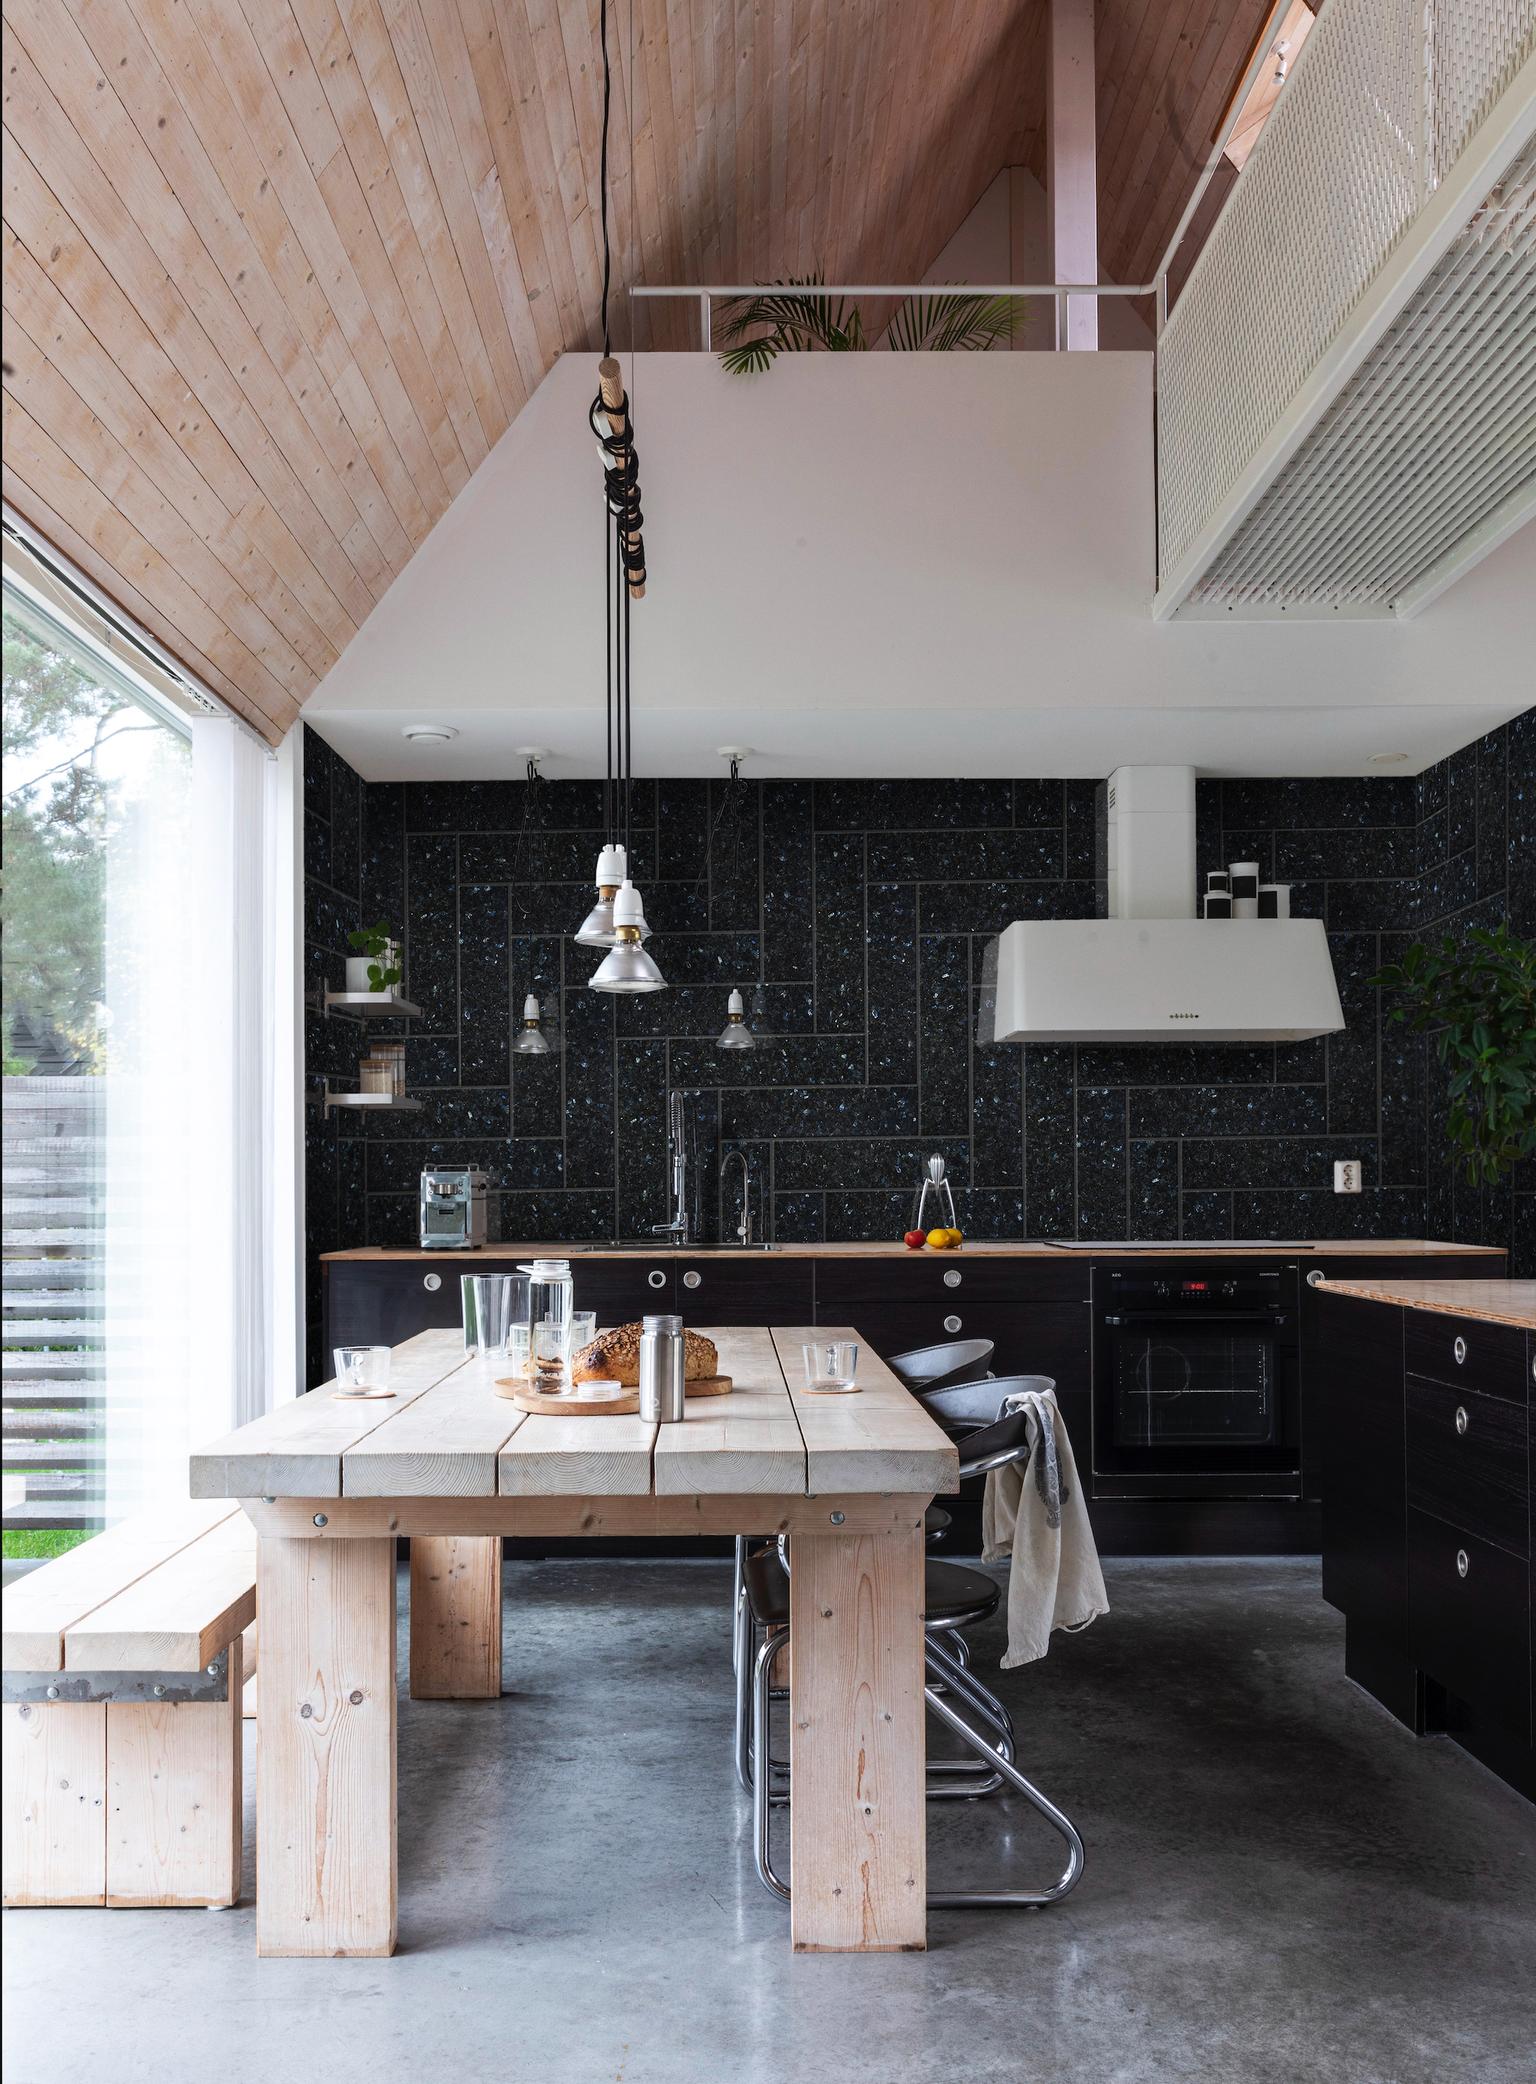 A modern kitchen from Lundhs - Business-Norway_Design_Lifestyle_Sustainable_functional